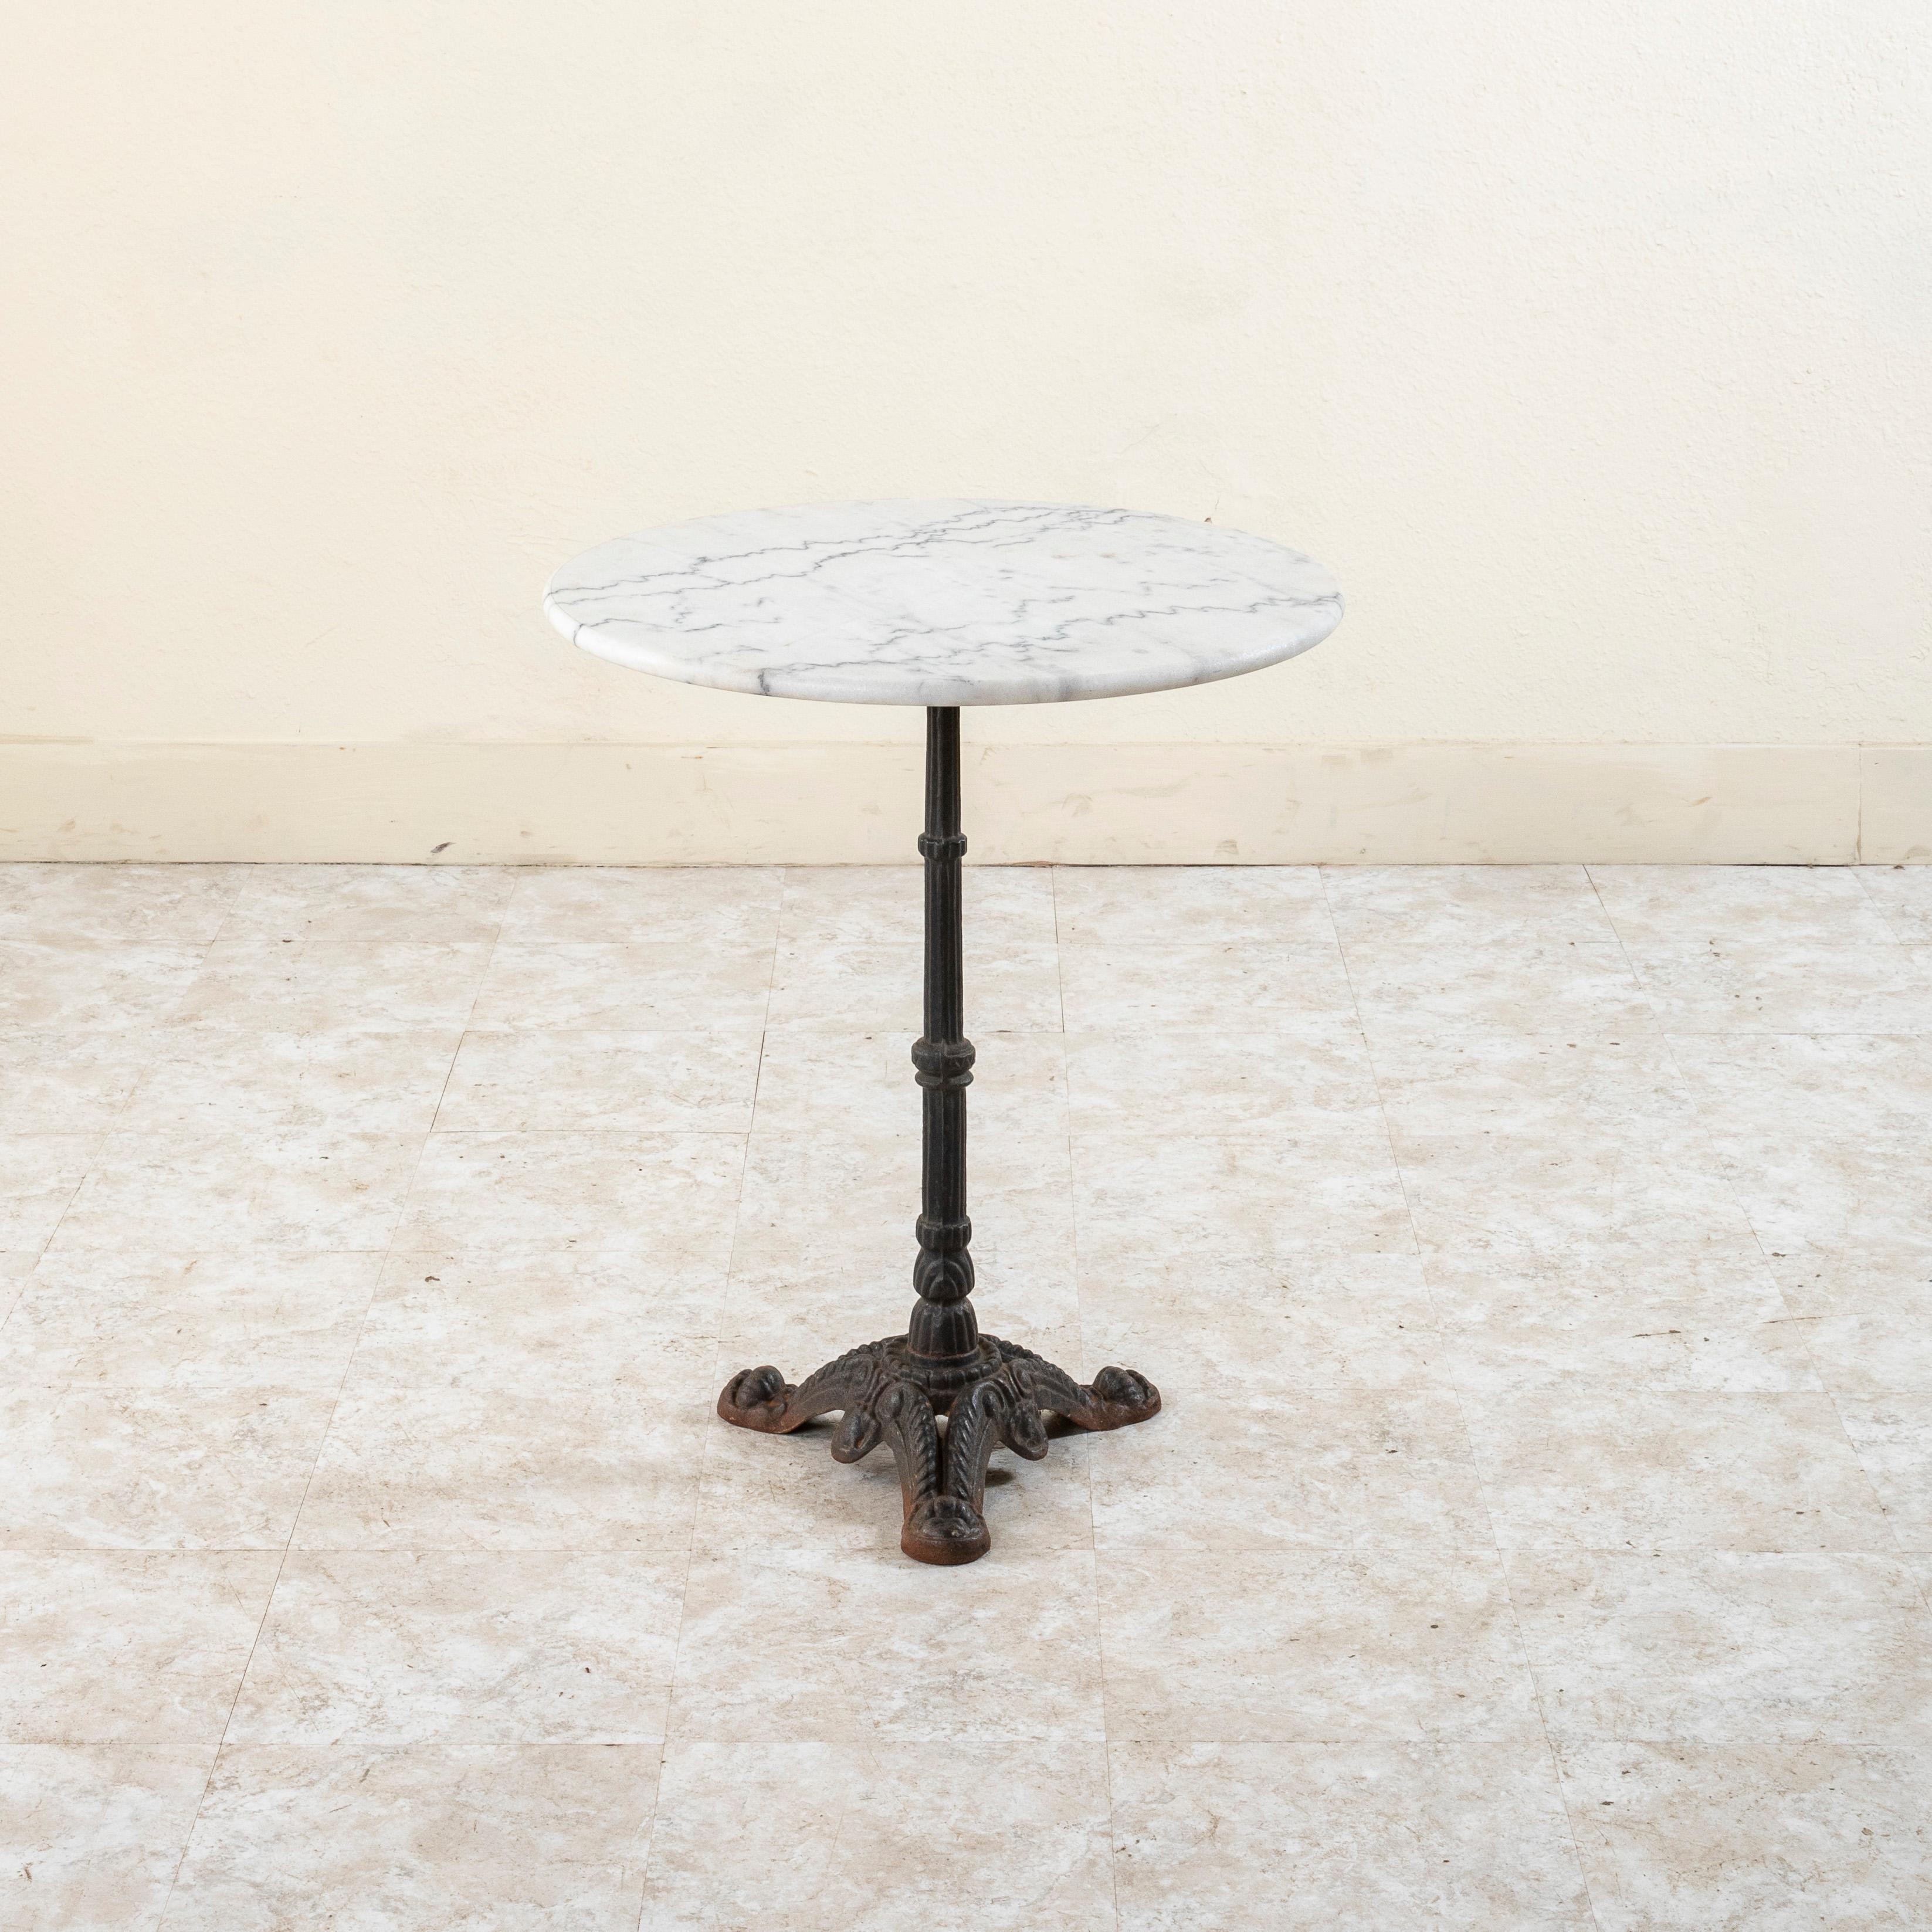 This classic French iron bistro table or cafe table from the mid twentieth century features a round honed white marble 24-inch diameter top with a rounded edge. The top rests on a cast iron base supported by a central fluted pillar. The base is